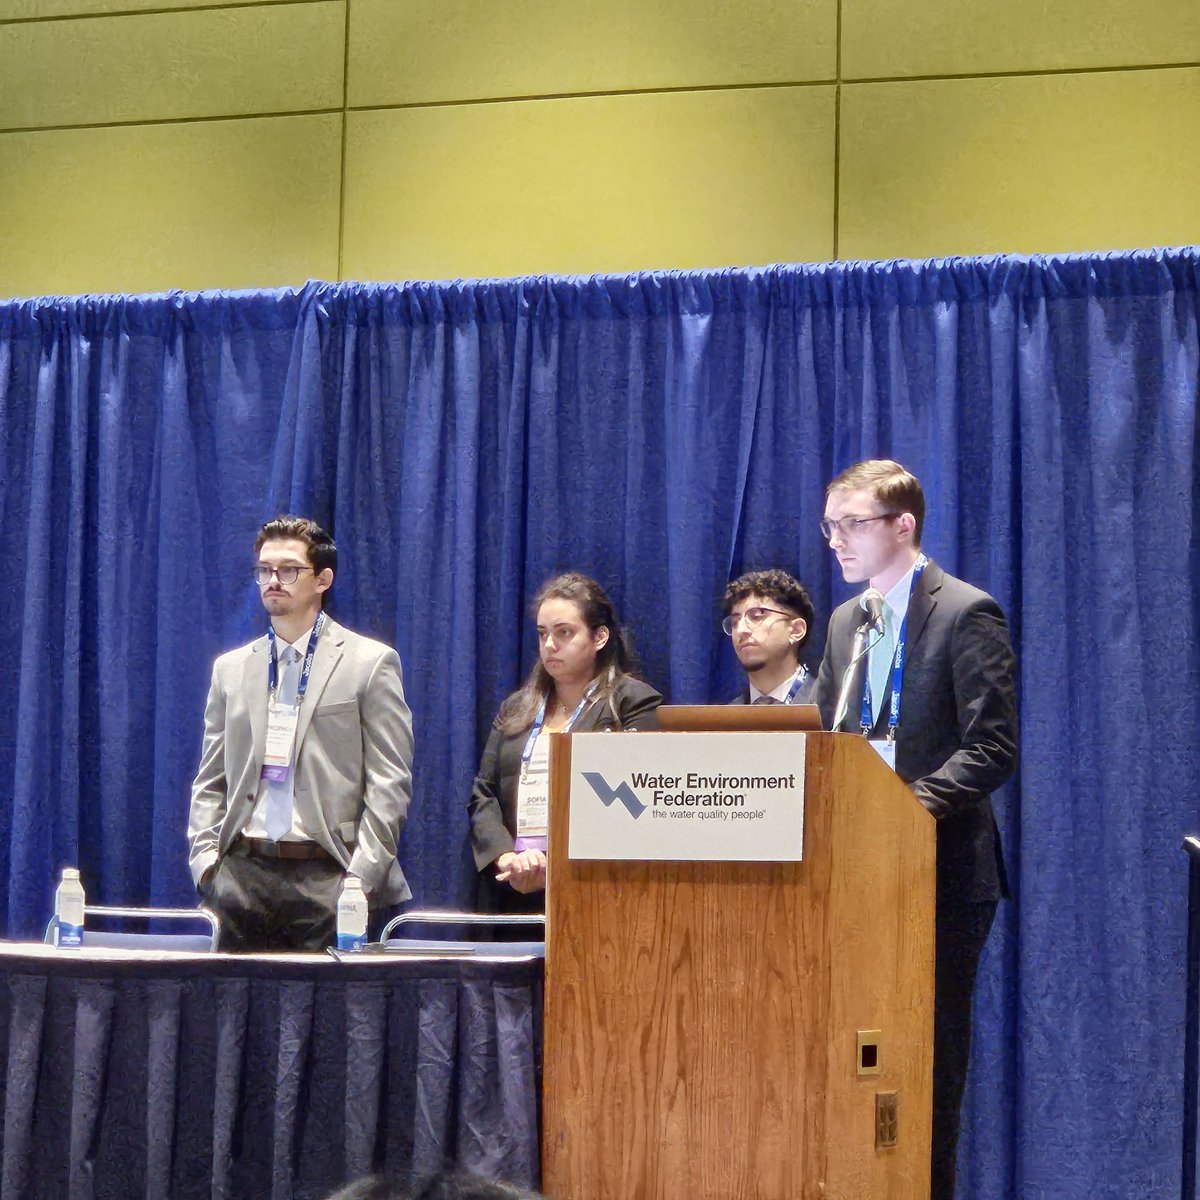 So proud of the two @NYwaterEnviro teams that competed in the #WEFTEC23 #StudentDesignCompetition! 

Special shoutout to the @sunyesf team who won 3rd place in the #WaterEnvironment Division!

#WEFTEC #NYWEA #WatersWorthIt #WorkInWater #WaterQuality #Water  #NOPCOCFOMO 
@WEFTEC